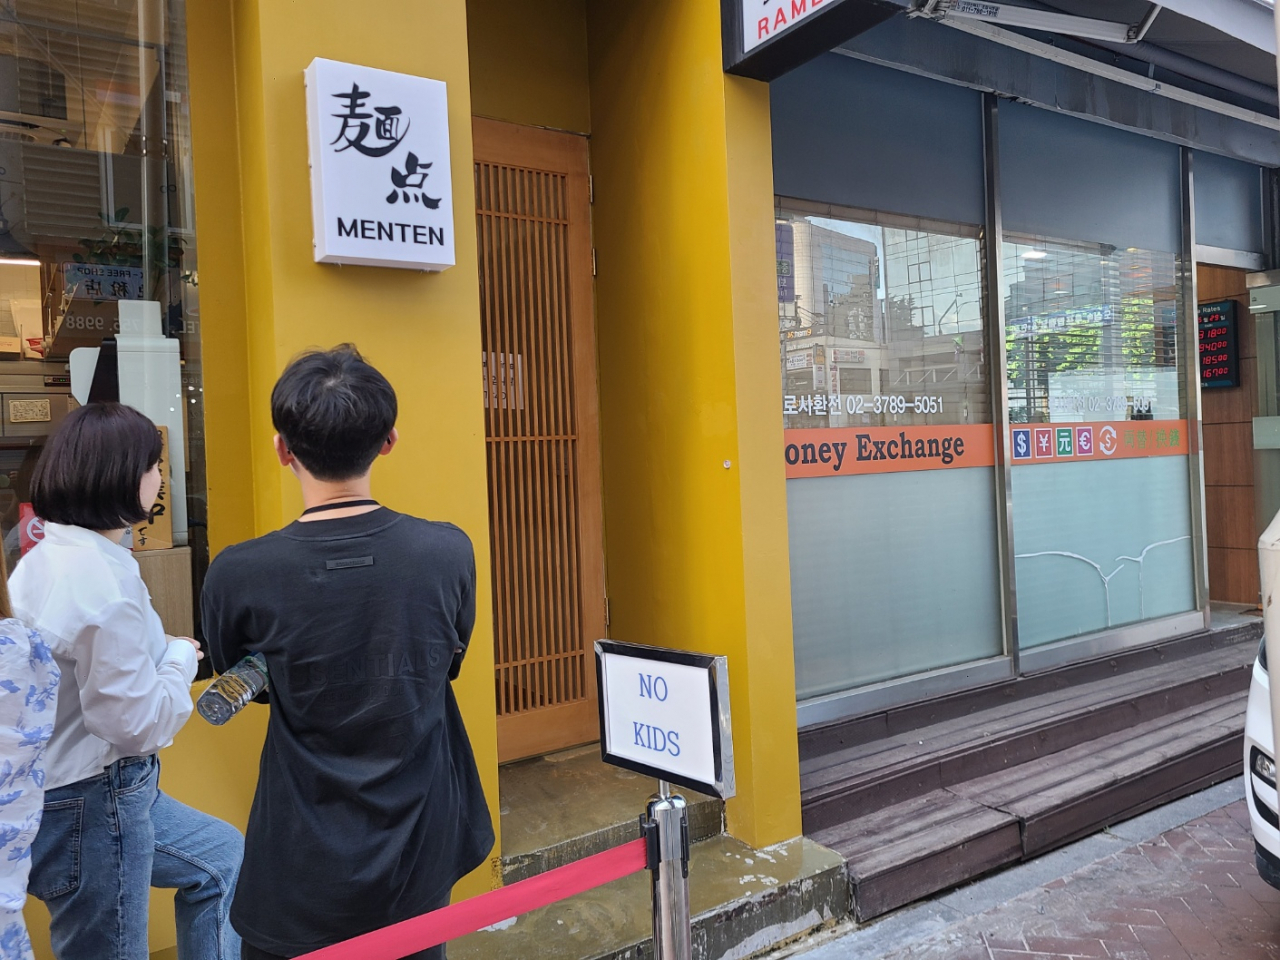 Customers line up in front of Menten in Myeong-dong, a restaurant where children are not allowed. (Jung Min-kyung/The Korea Herald)